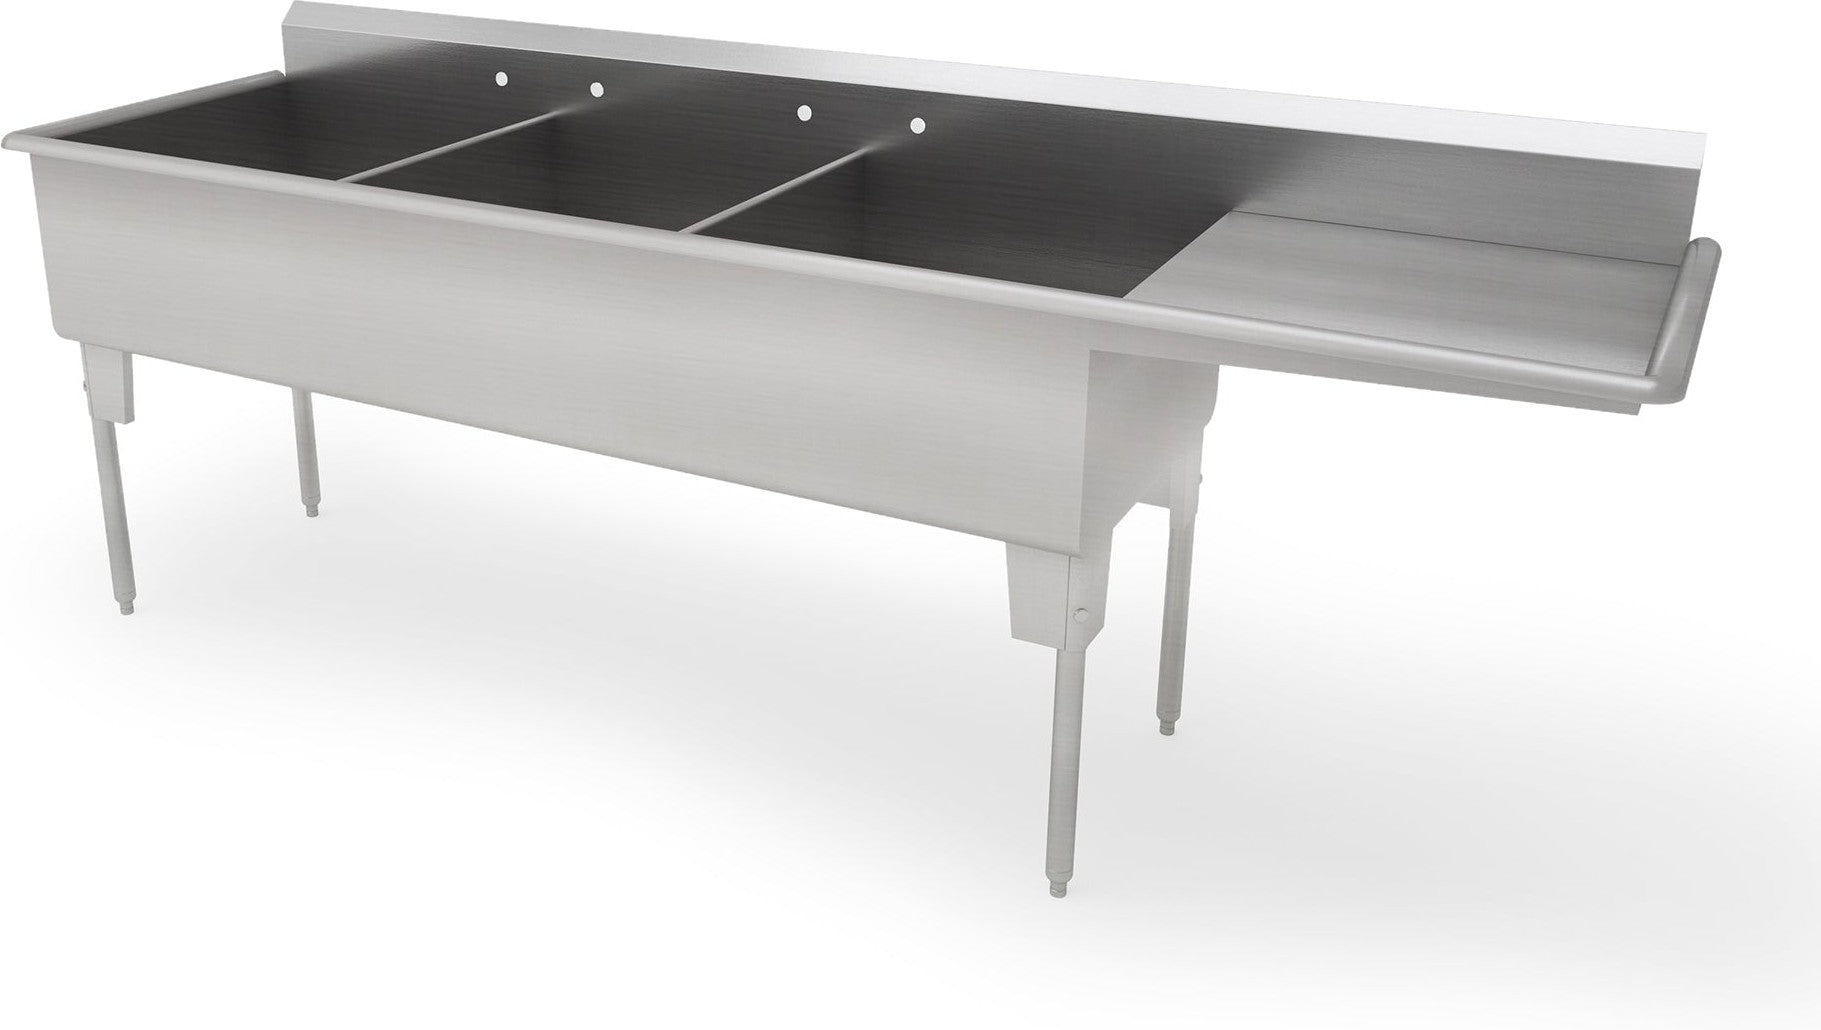 Franesse - Triple Compartment Sink With Drainboard - T2754-14-DR30-O